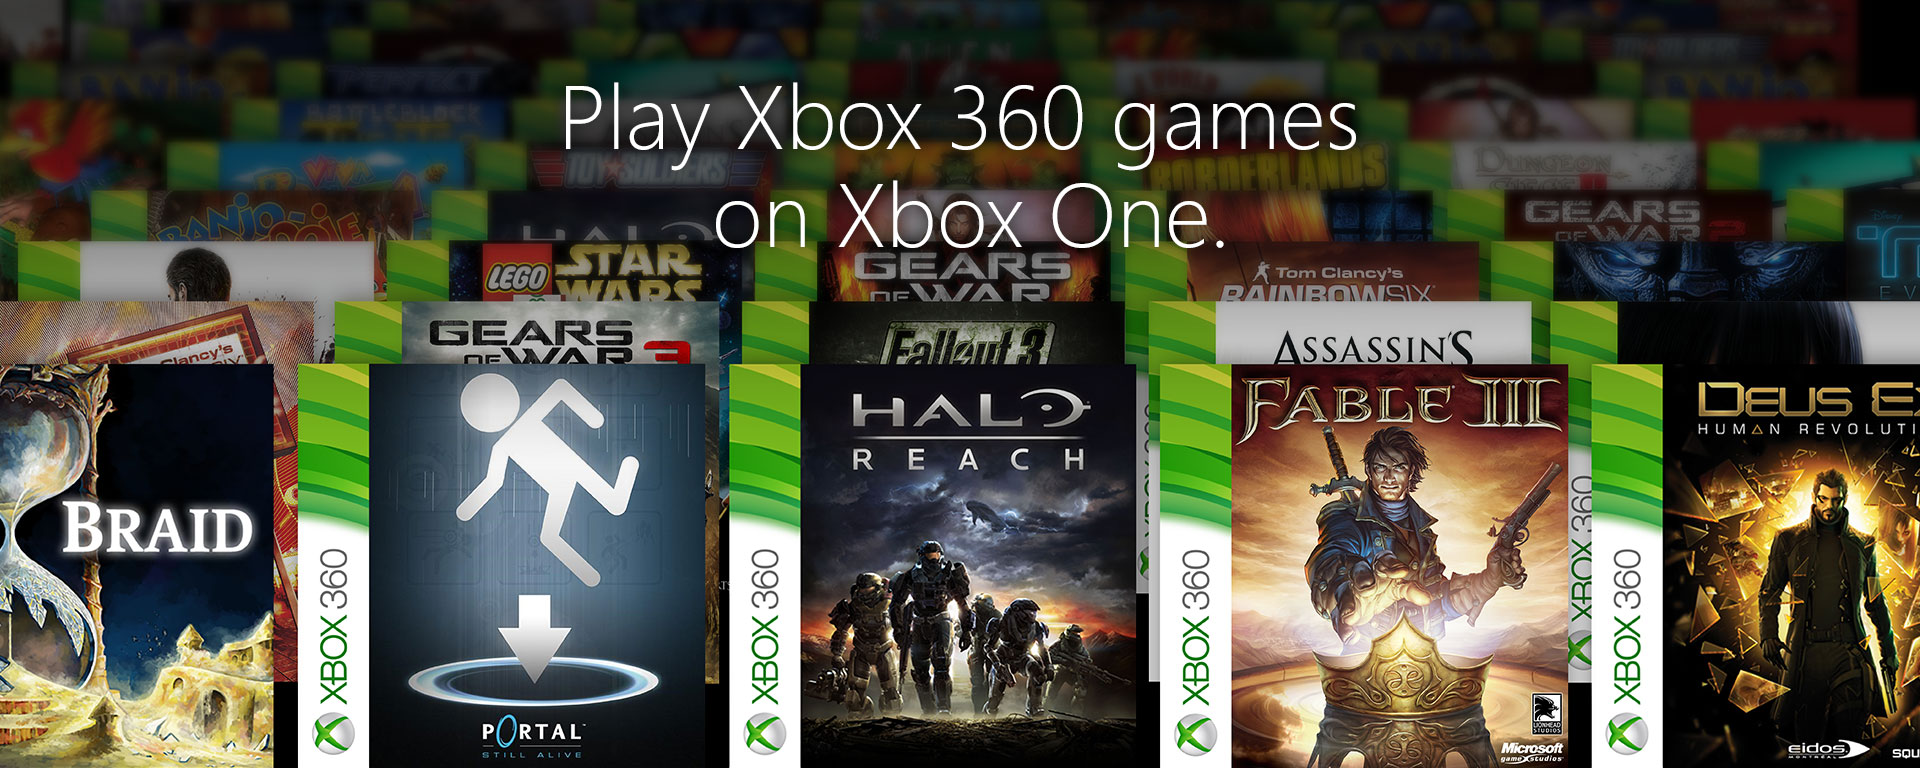 Backward compatibility image with new titles including Braid, Portal, Halo Reach and Fable 3